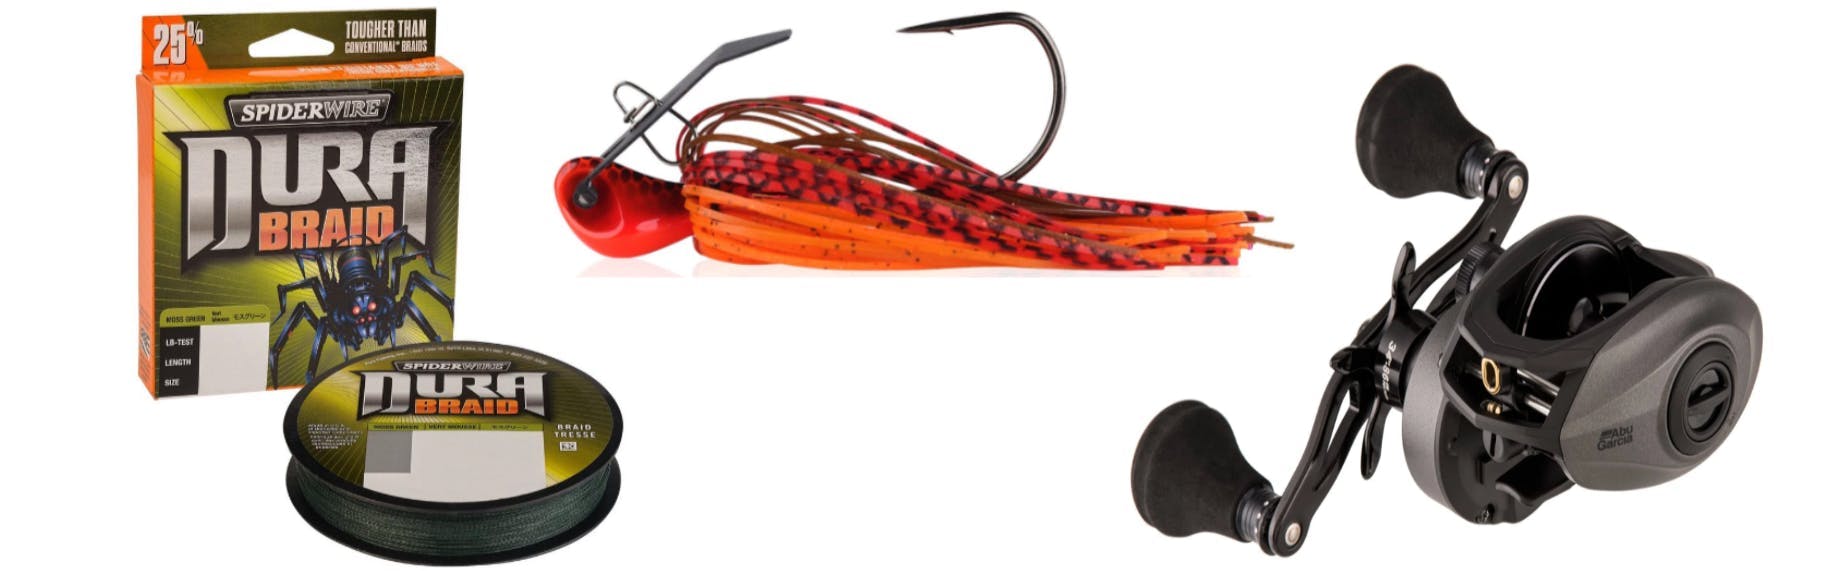 From left to right, the Dura Spiderwire Braid, the Berkley Slobberknocker, and the Revo Reel from Pure Fishing. 